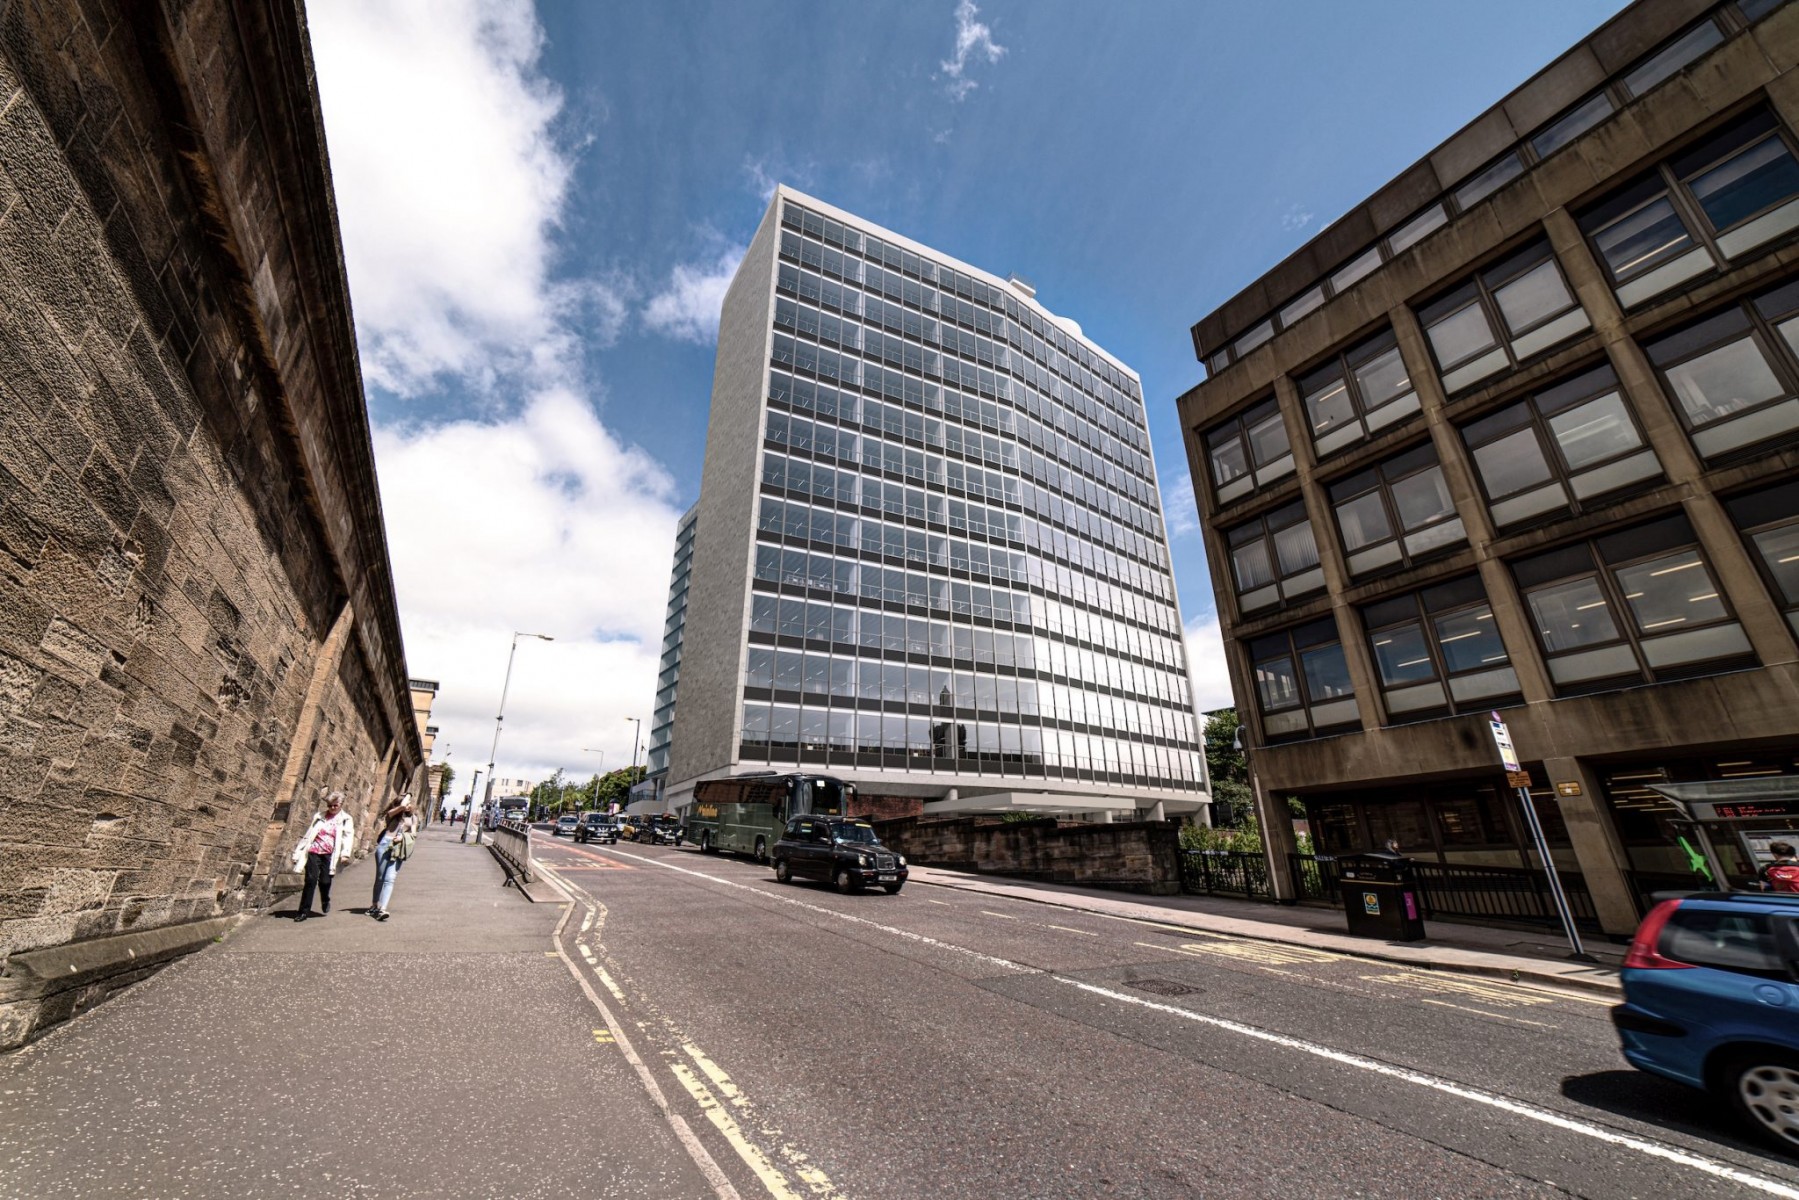 New images highlight proposed office makeover of ‘People Make Glasgow’ building